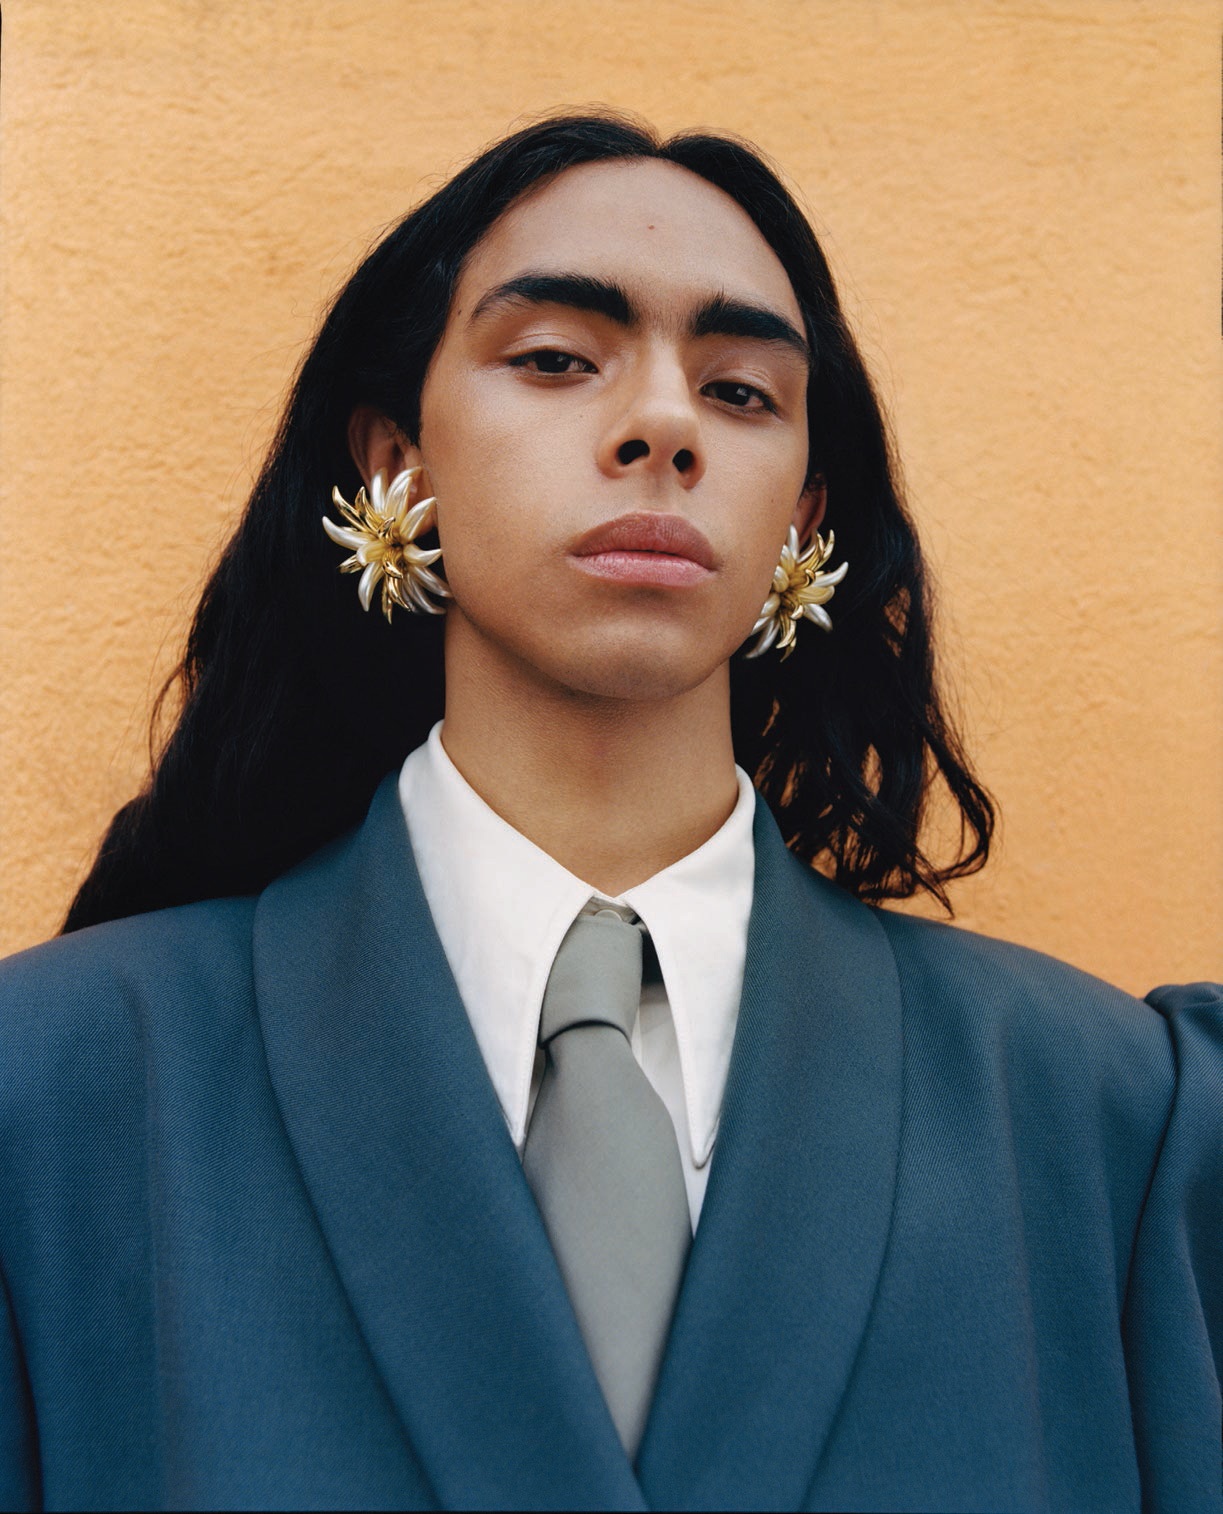 A model poses for Garage magazine’s “Que Onda?” editorial in April 2020. Photographed by Nadine Ijewere